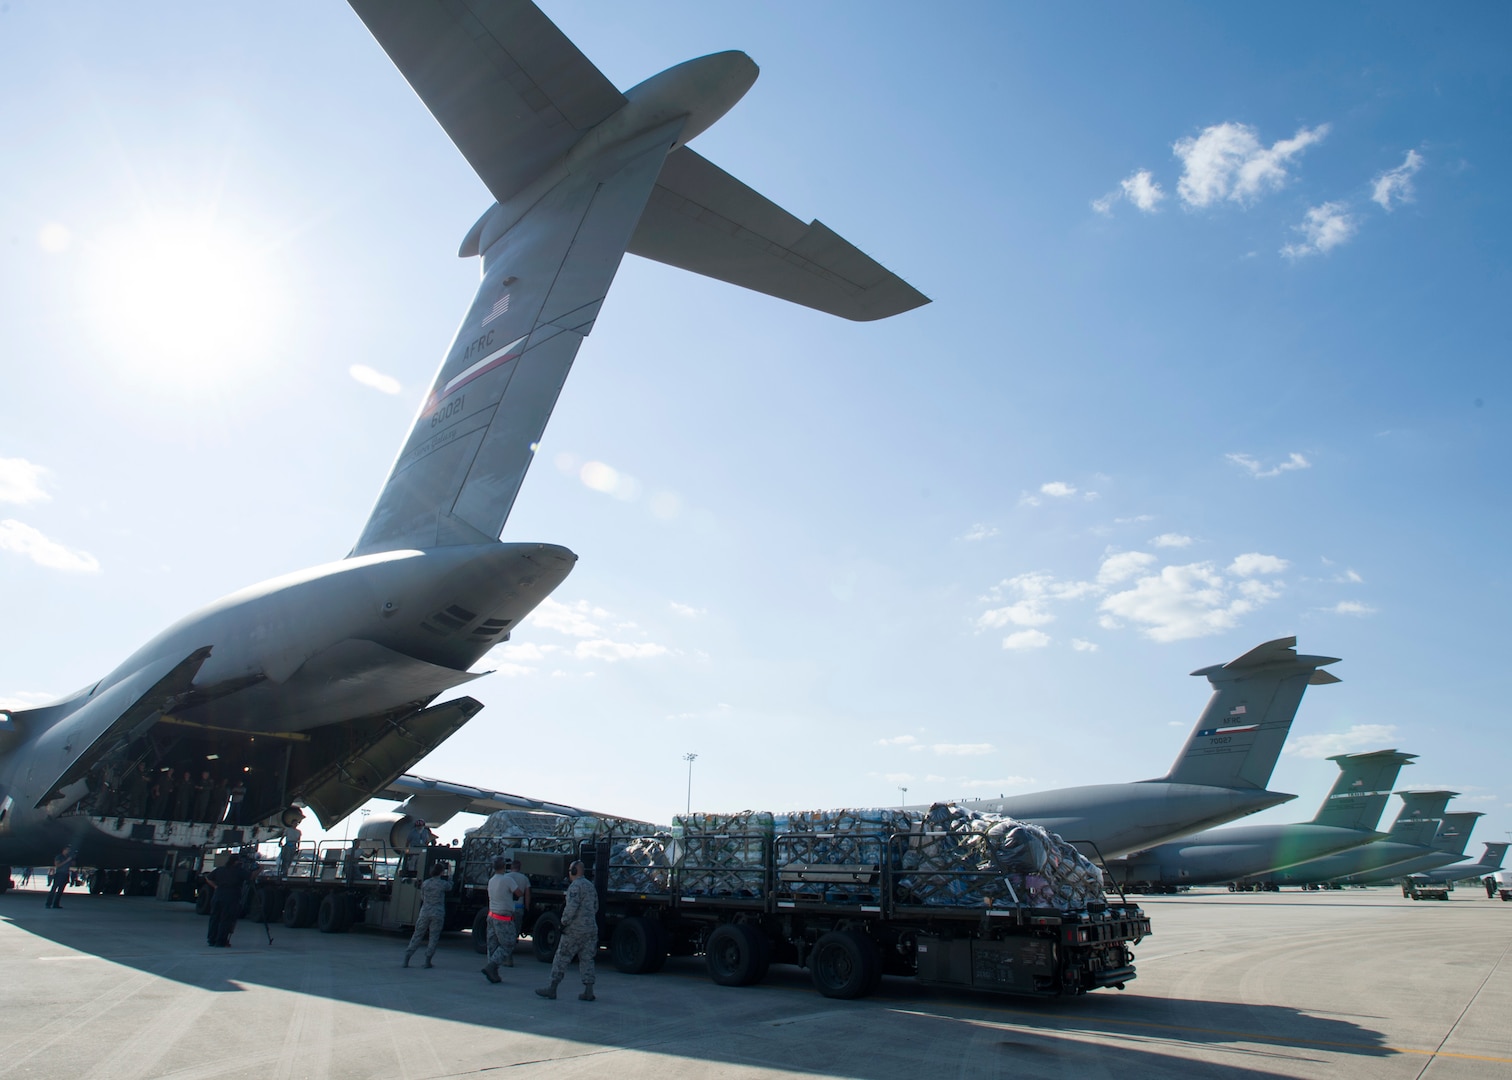 59th Medical Wing’s medical gear gets loaded into a Lockheed C-5 Galaxy at Joint Base San Antonio-Lackland, August 30. The wing is sending more than 70-members of the Air Force’s flagship medical wing to provide medical attention to those affected by the flooding.